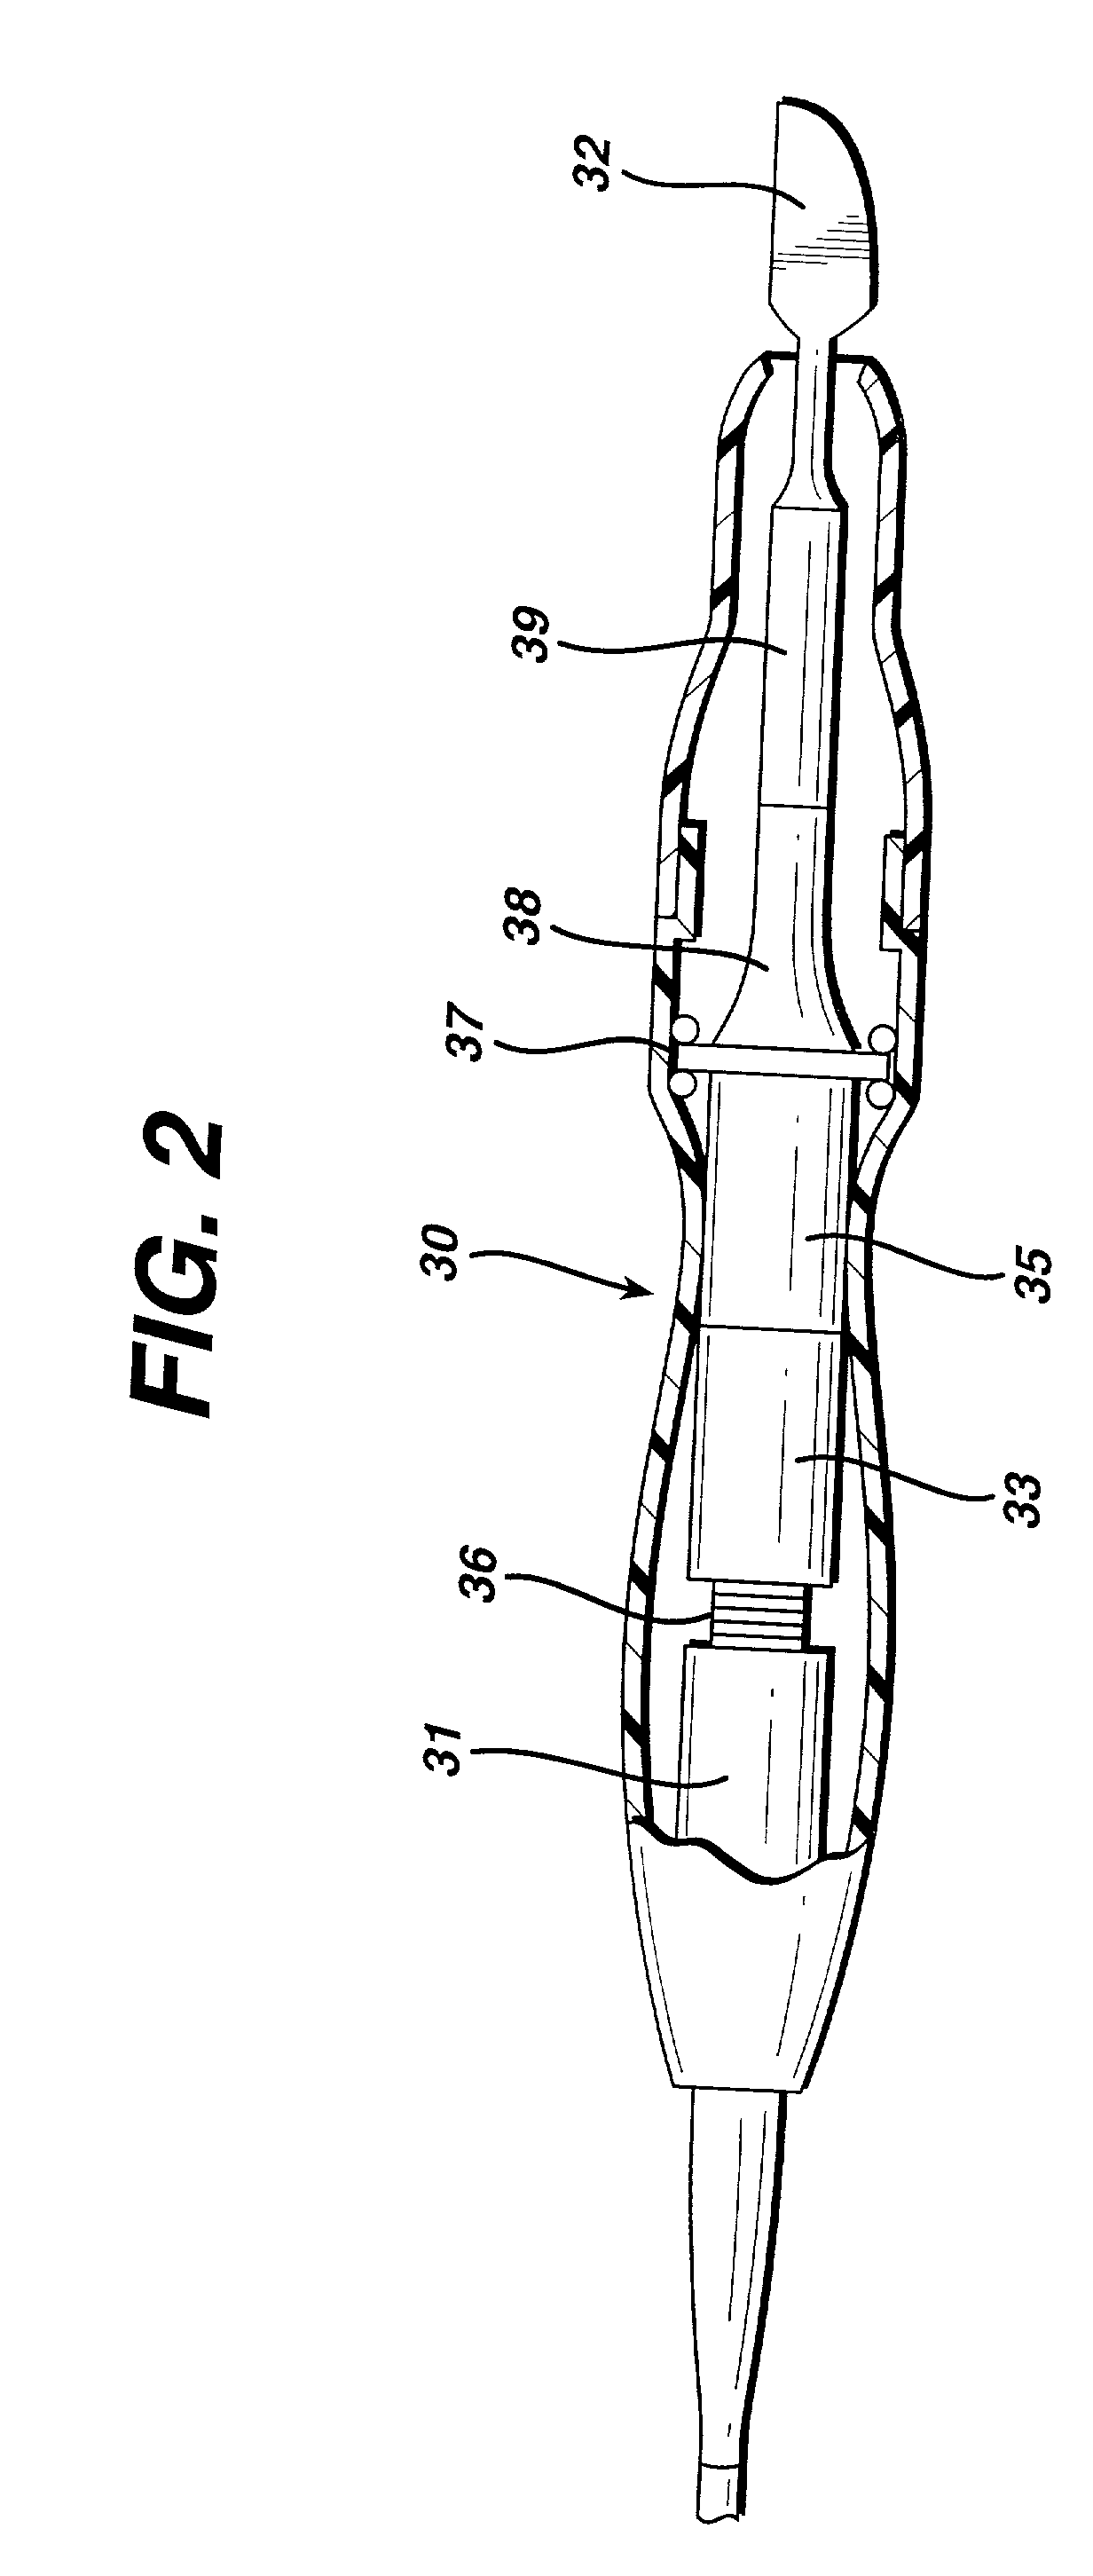 Ultrasonic surgical system within digital control